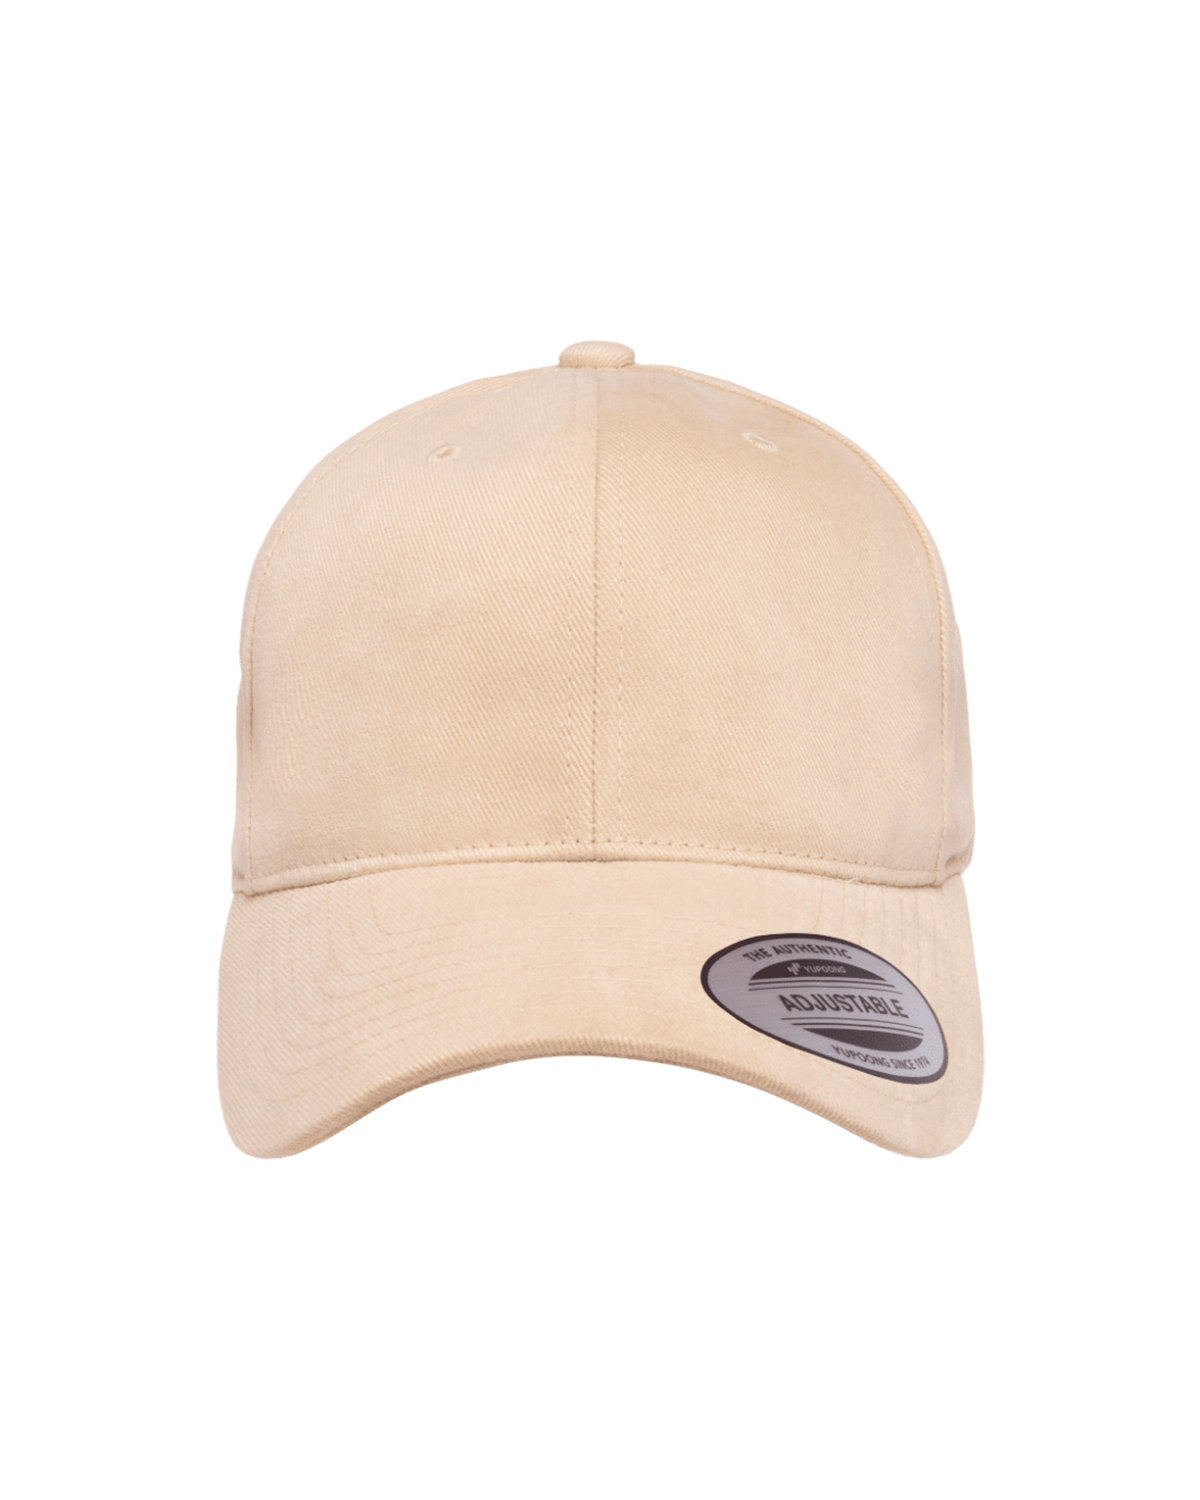 Headwear USA 4246 Brushed cotton twill with suede visor 